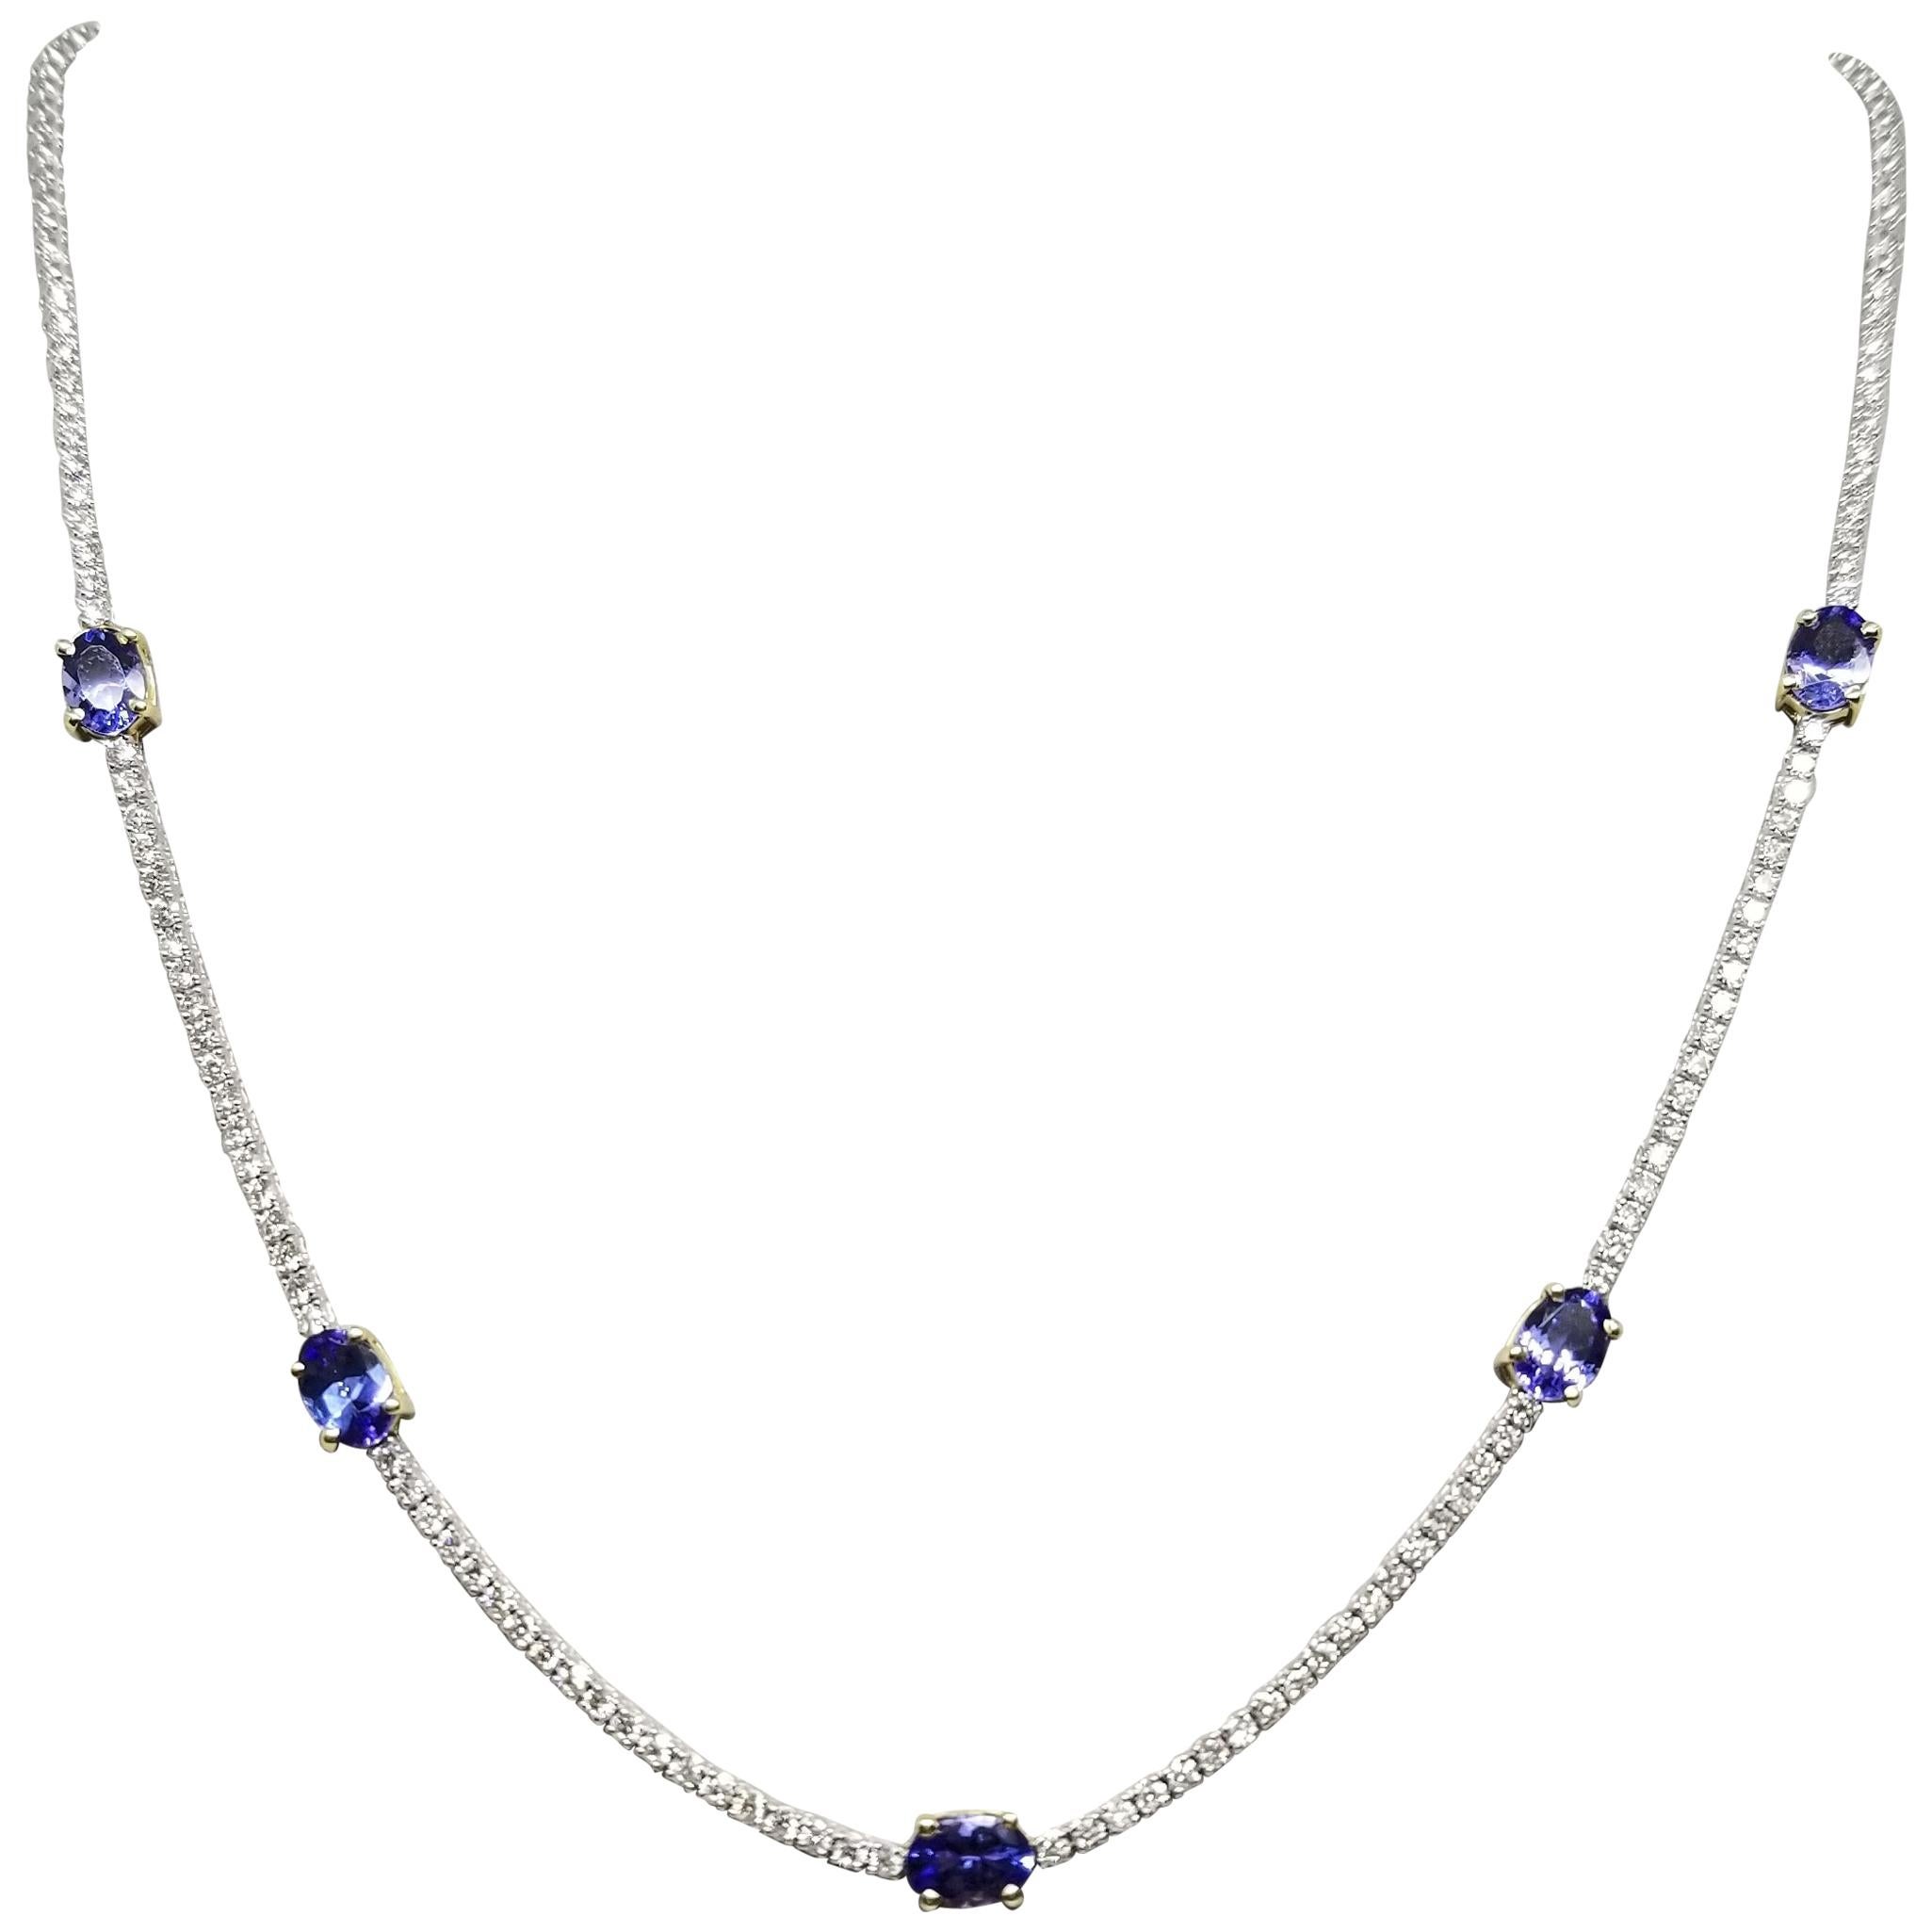 Diamond "Tennis" Necklace with 2.36cts in Diamonds and Tanzanite Set in 2-Tone